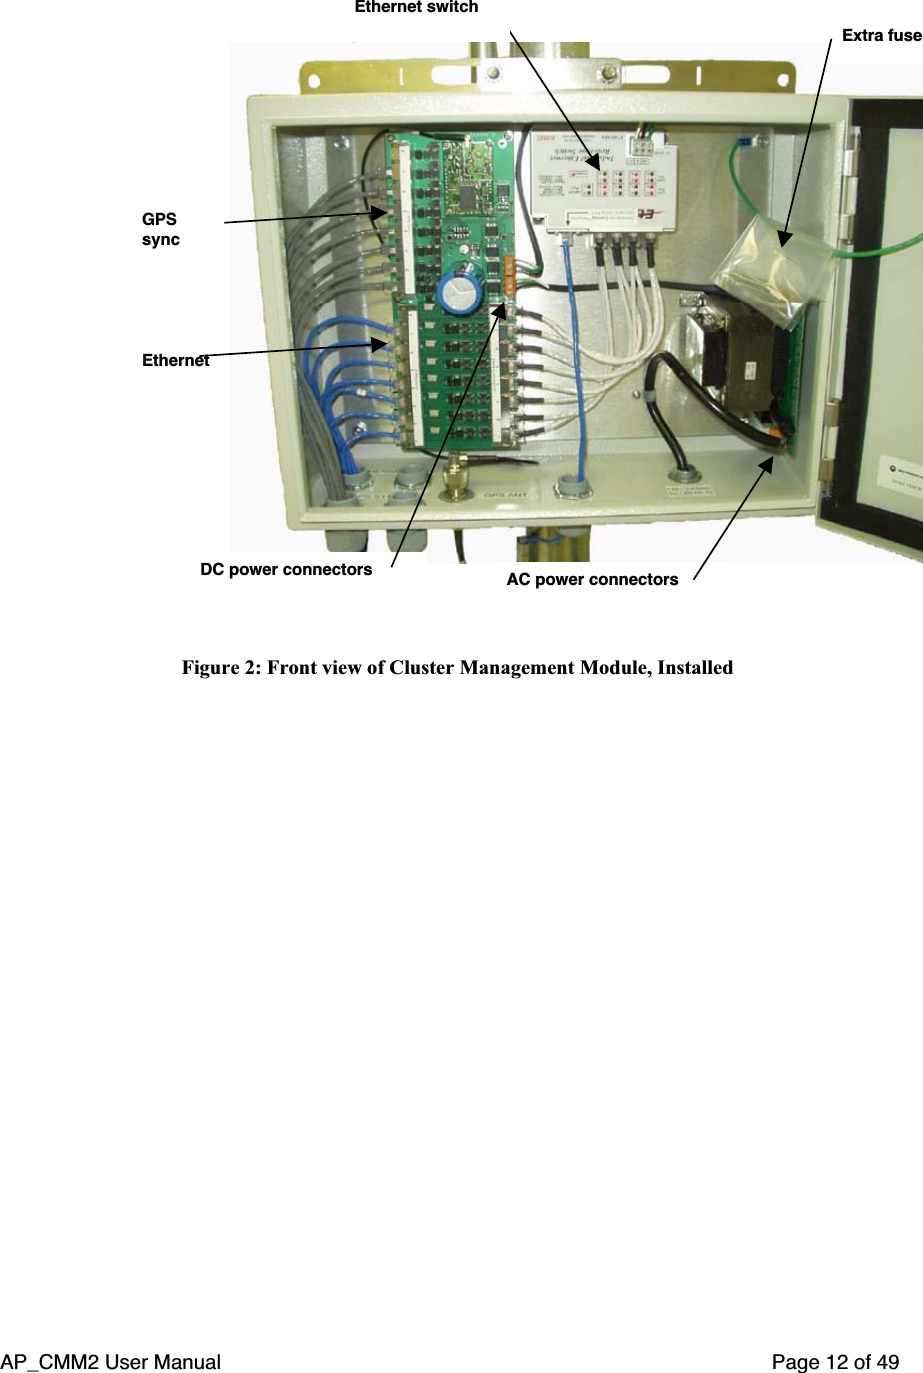 AP_CMM2 User Manual Page 12 of 49GPSsyncEthernetEthernet switchExtra fuseDC power connectors AC power connectorsFigure 2: Front view of Cluster Management Module, Installed